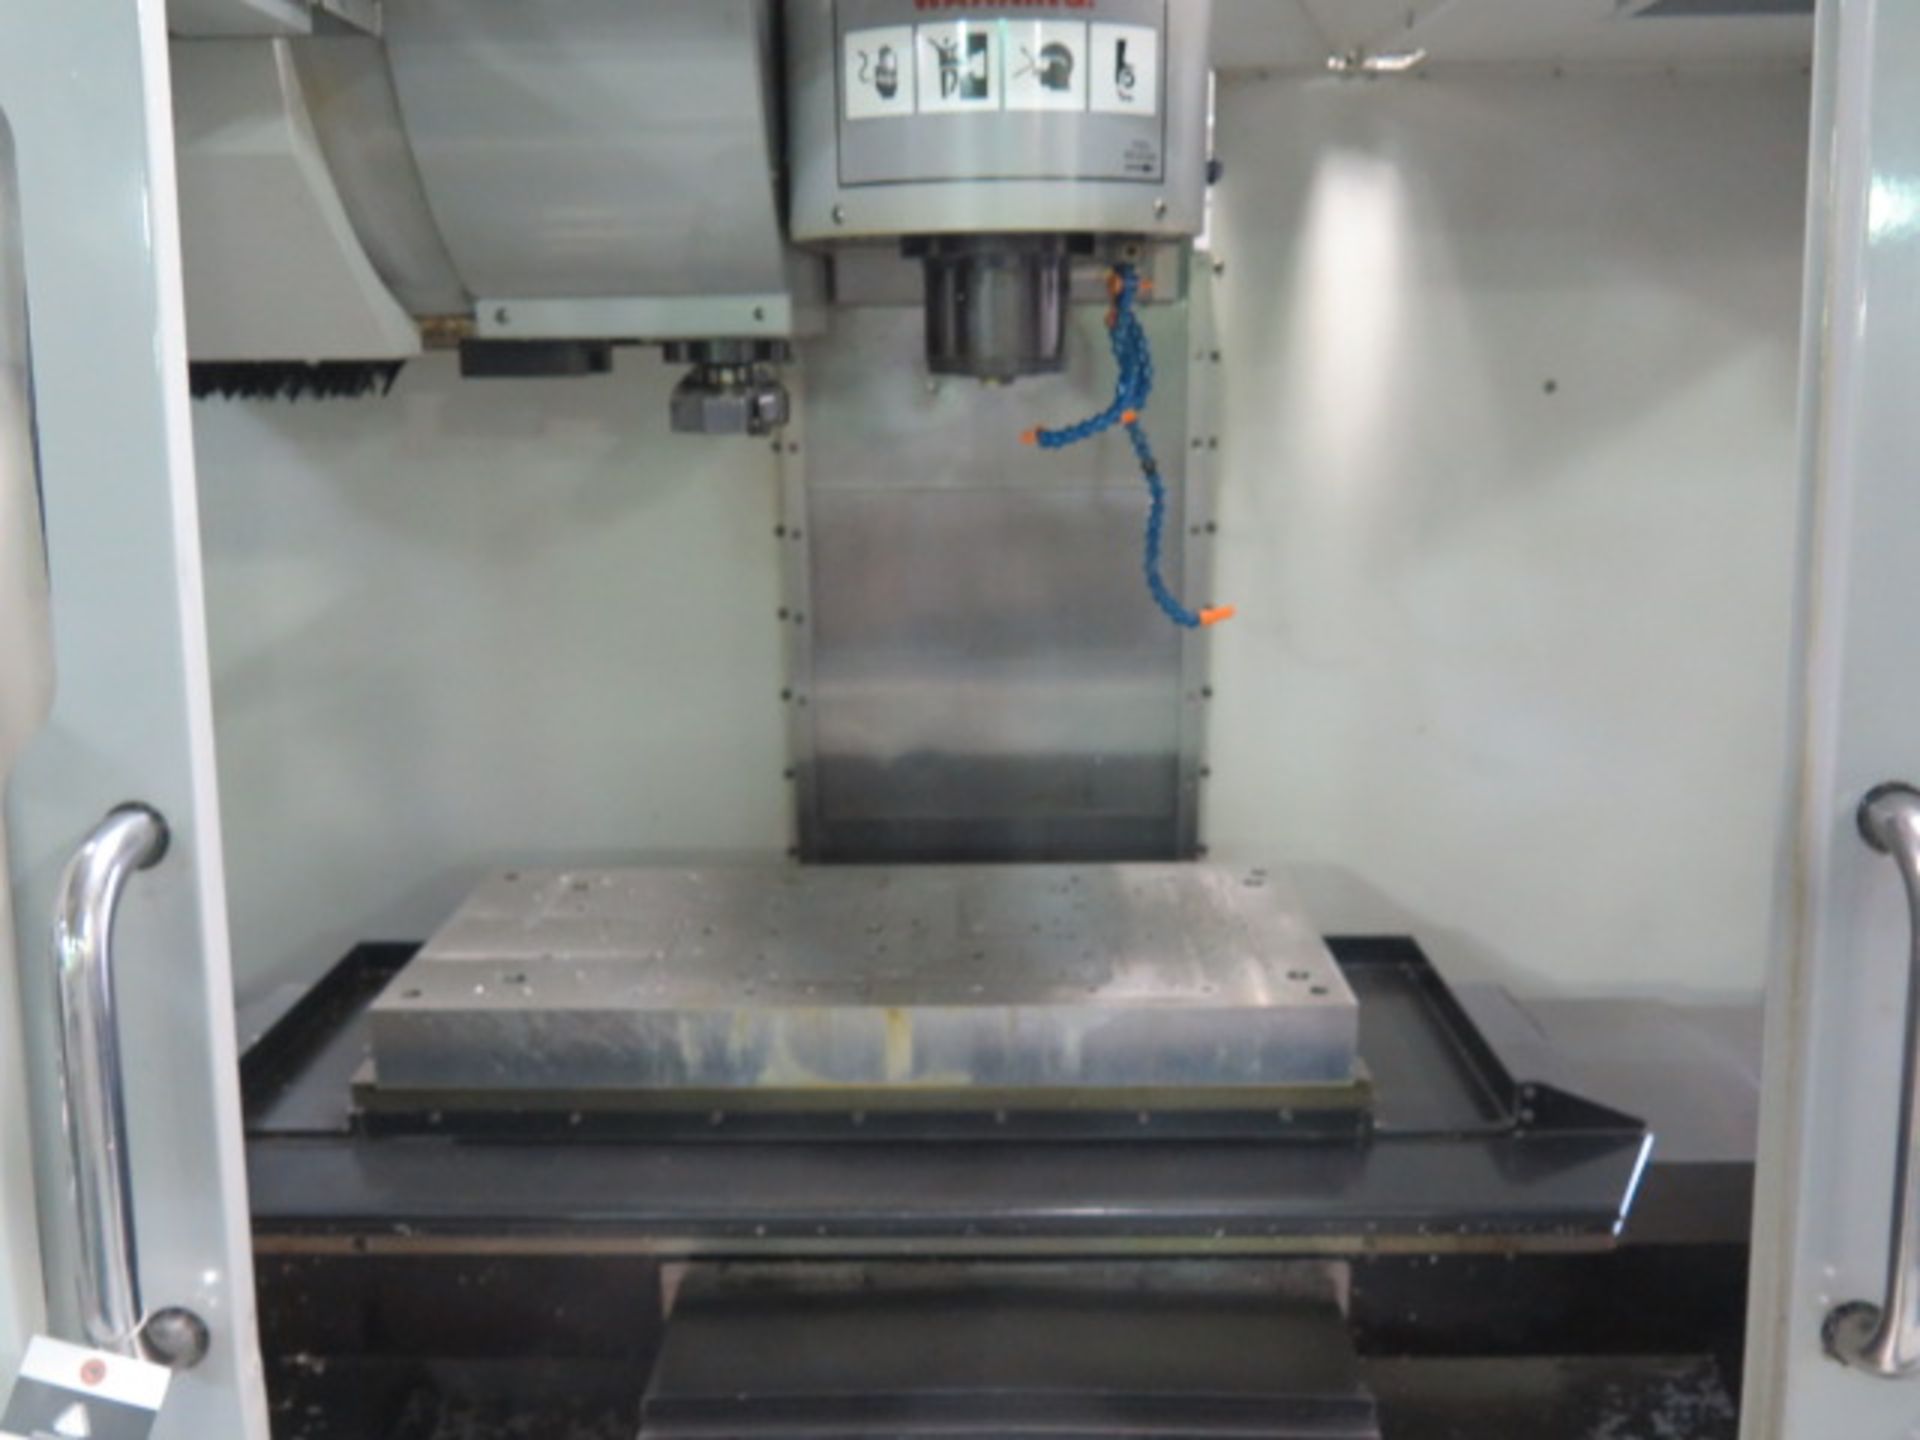 2008 Haas Super VF-2SS CNC Vertical Machining Center s/n 1067564 w/ Haas Controls, 24-Station Side - Image 4 of 13